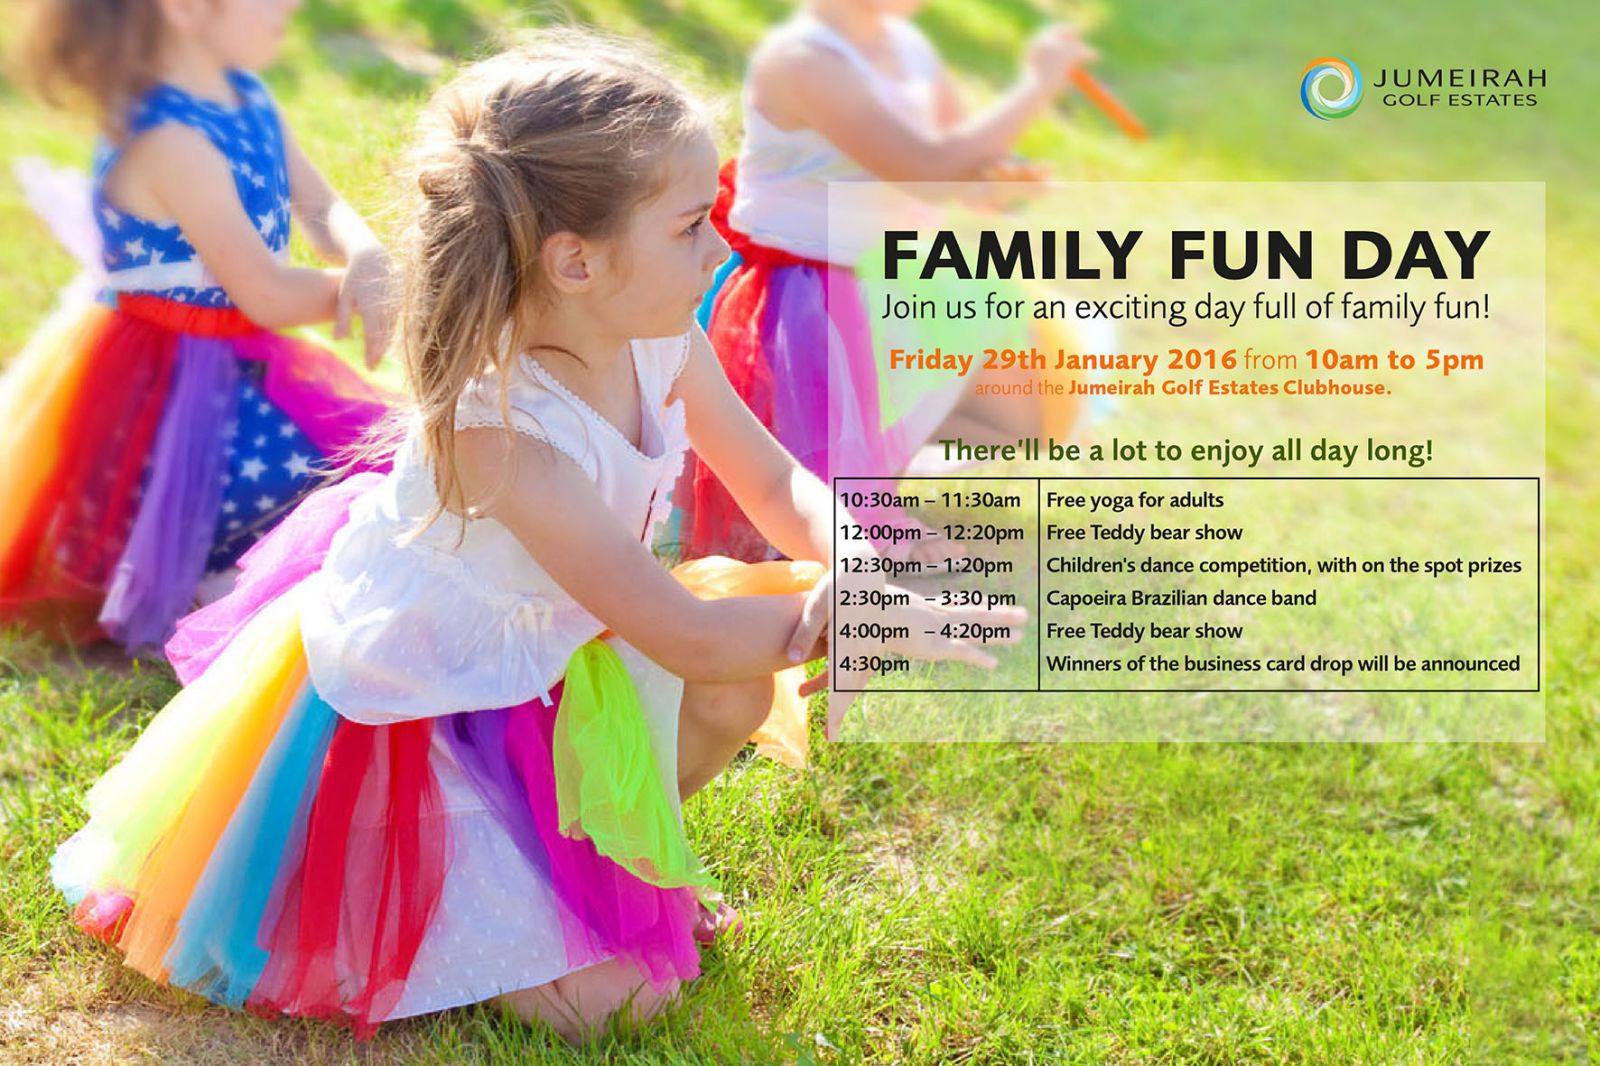 Jumeirah Golf Estates is happy to announce JGE Family Fun Day! An exciting full day for you, your ki